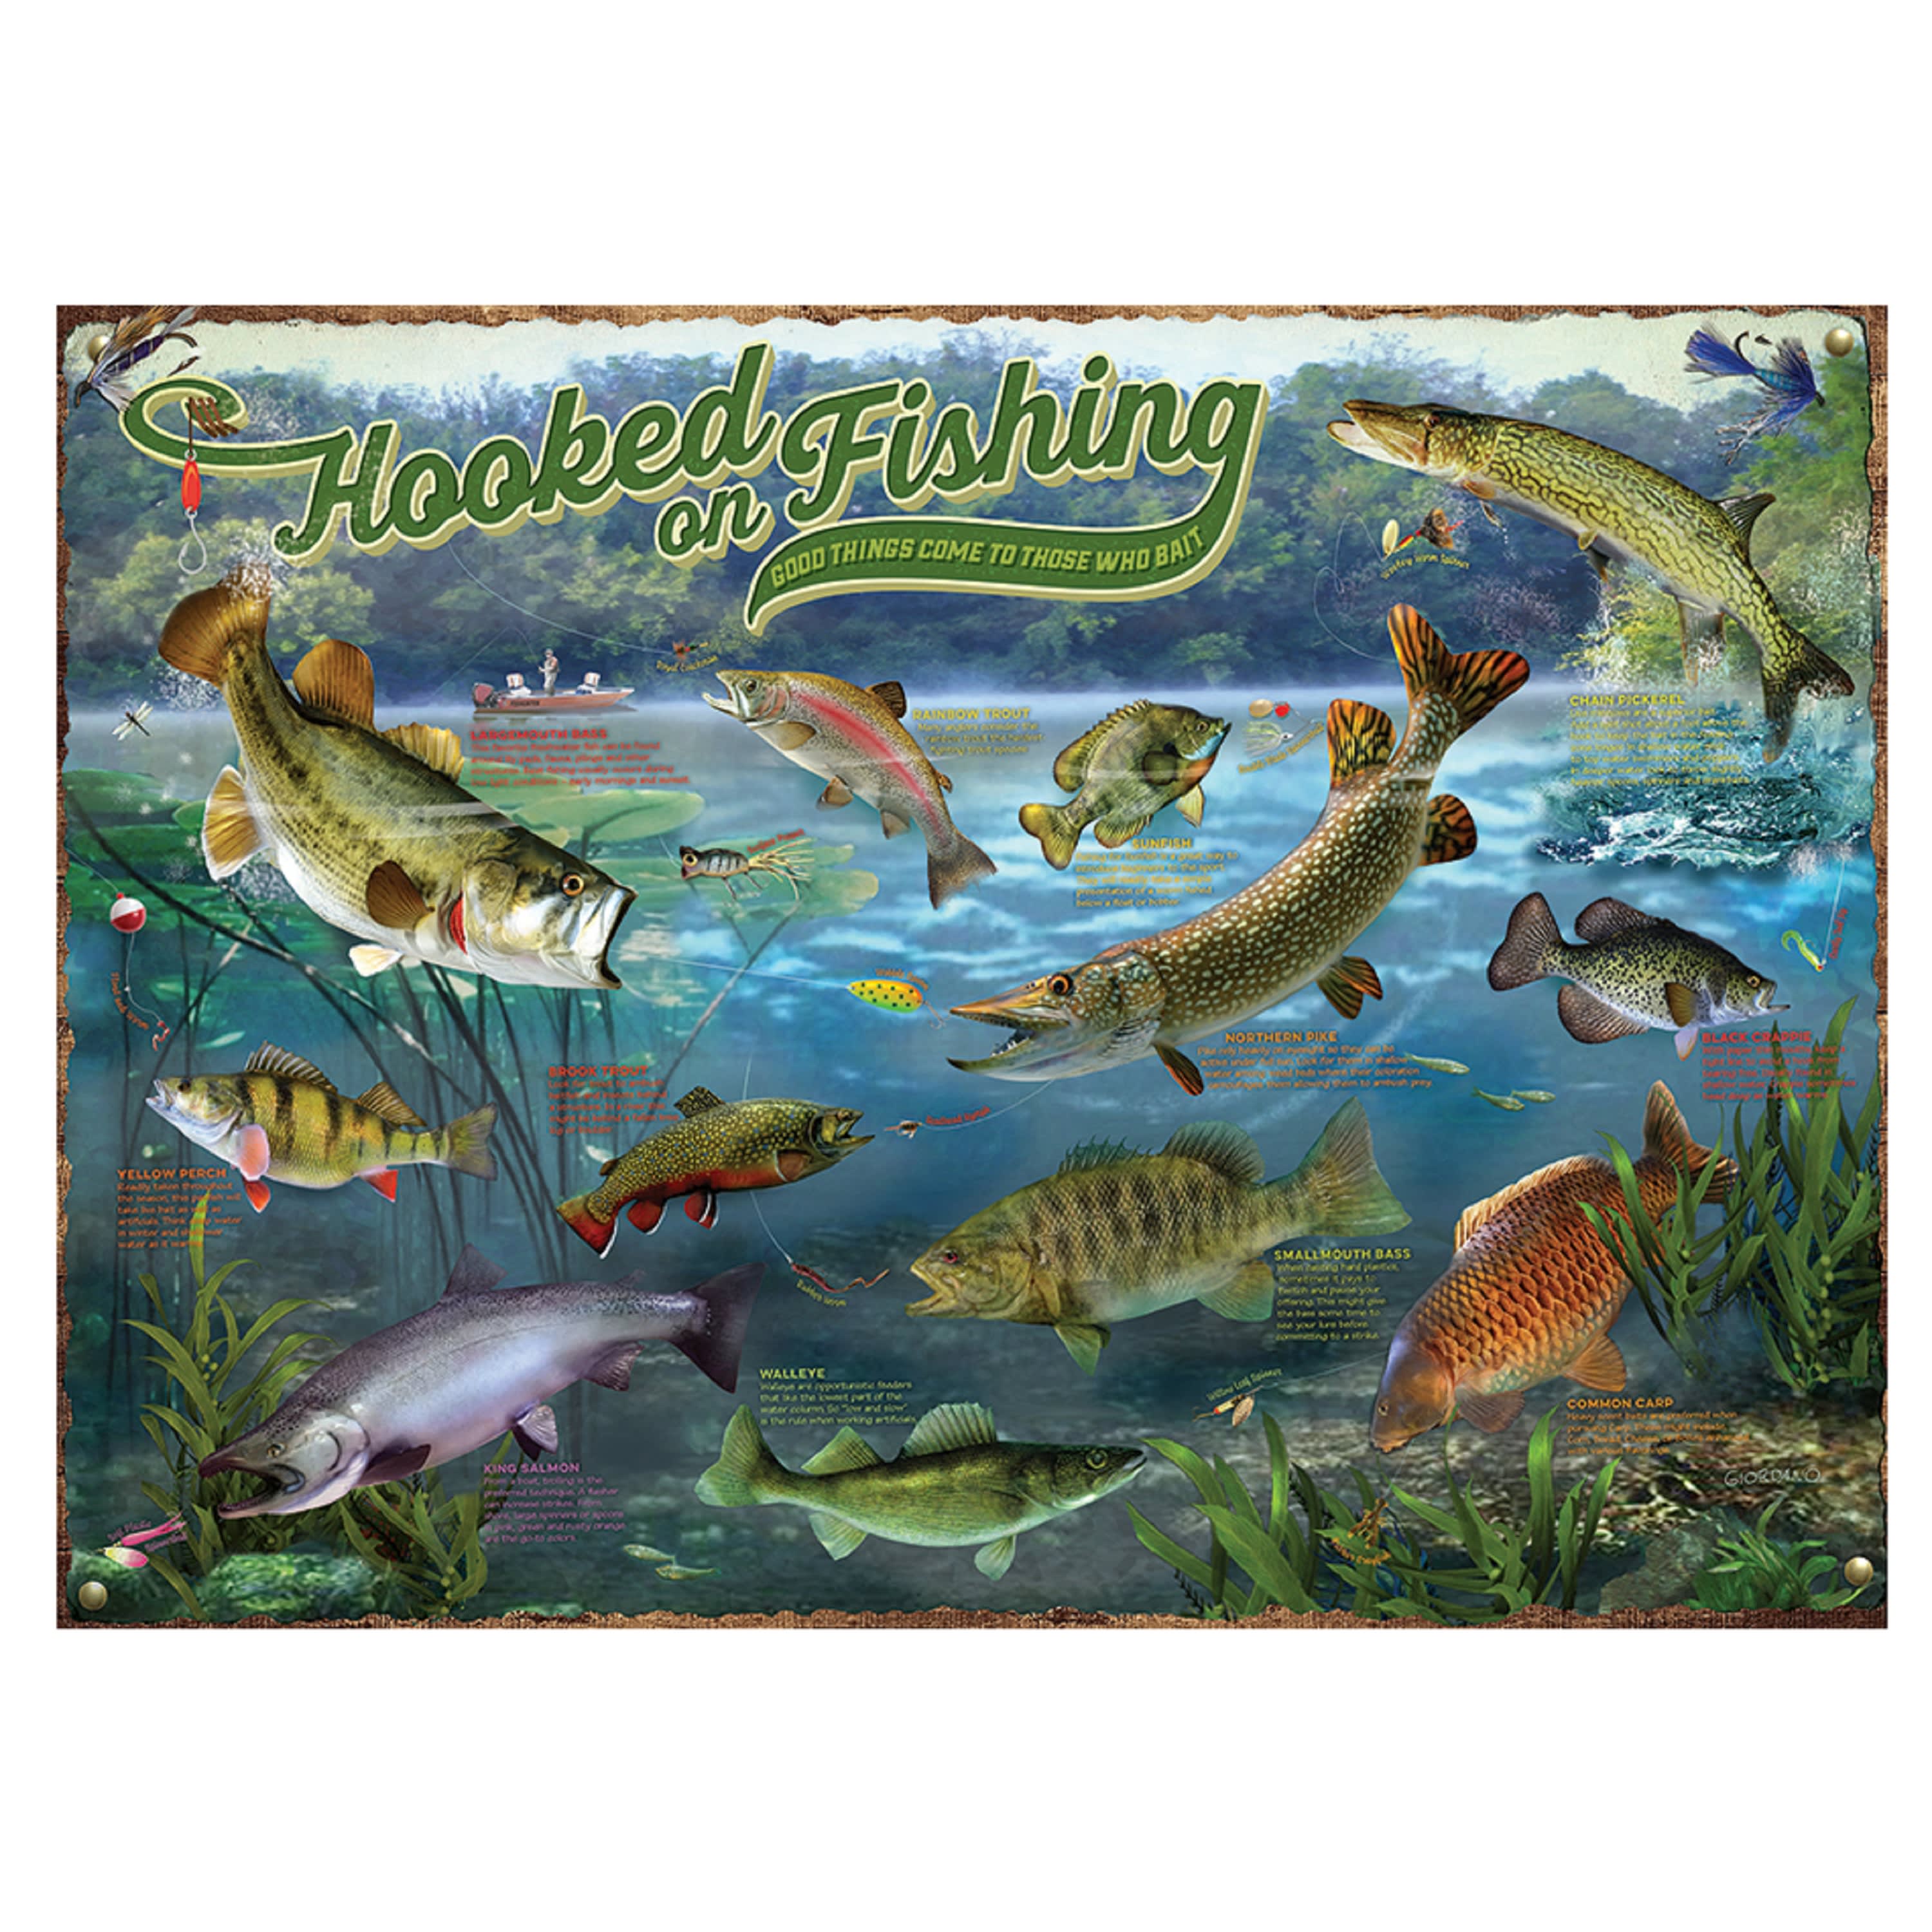 Cobble Hill Hooked on Fishing Puzzle - 1000 Pieces